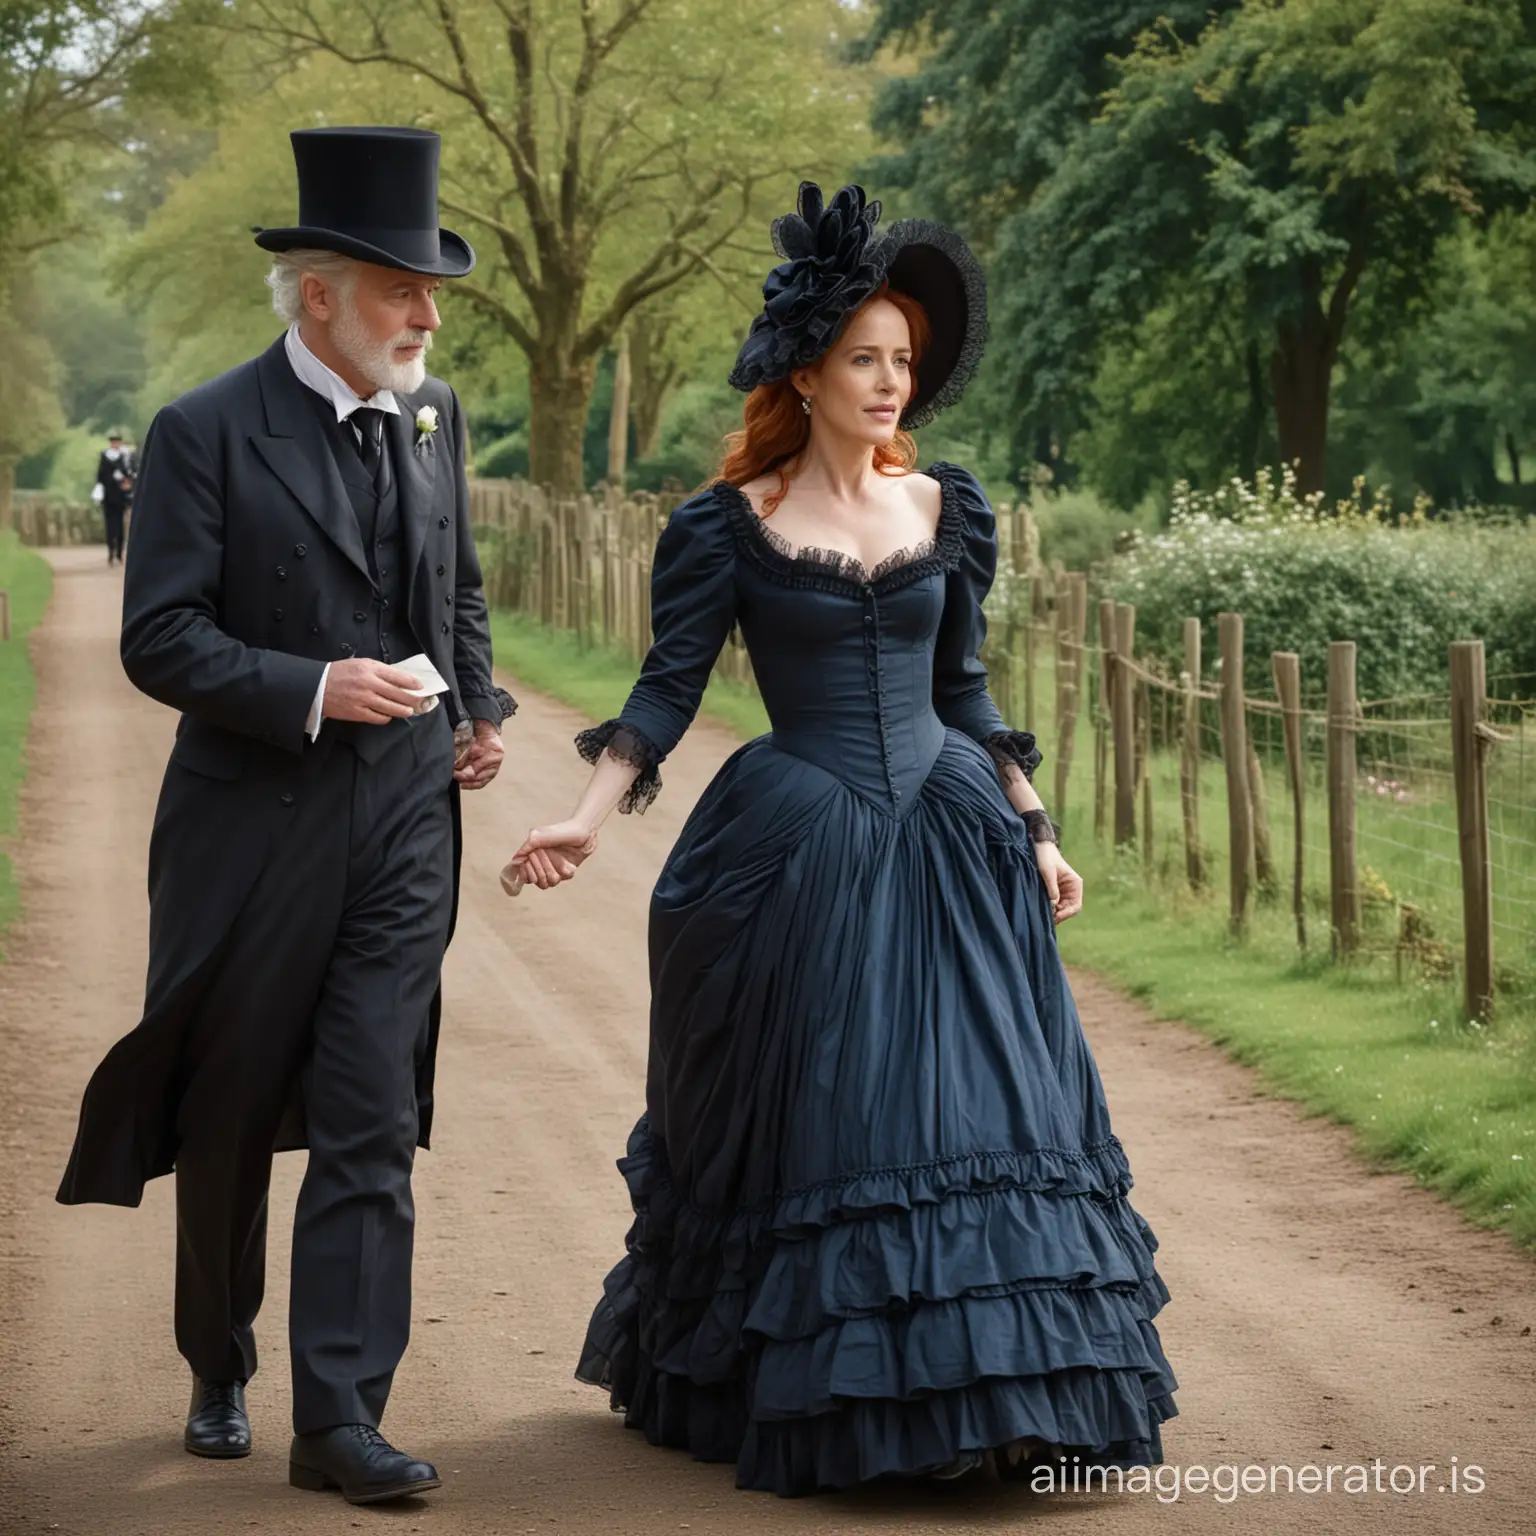 Newlywed-Couple-in-Victorian-Attire